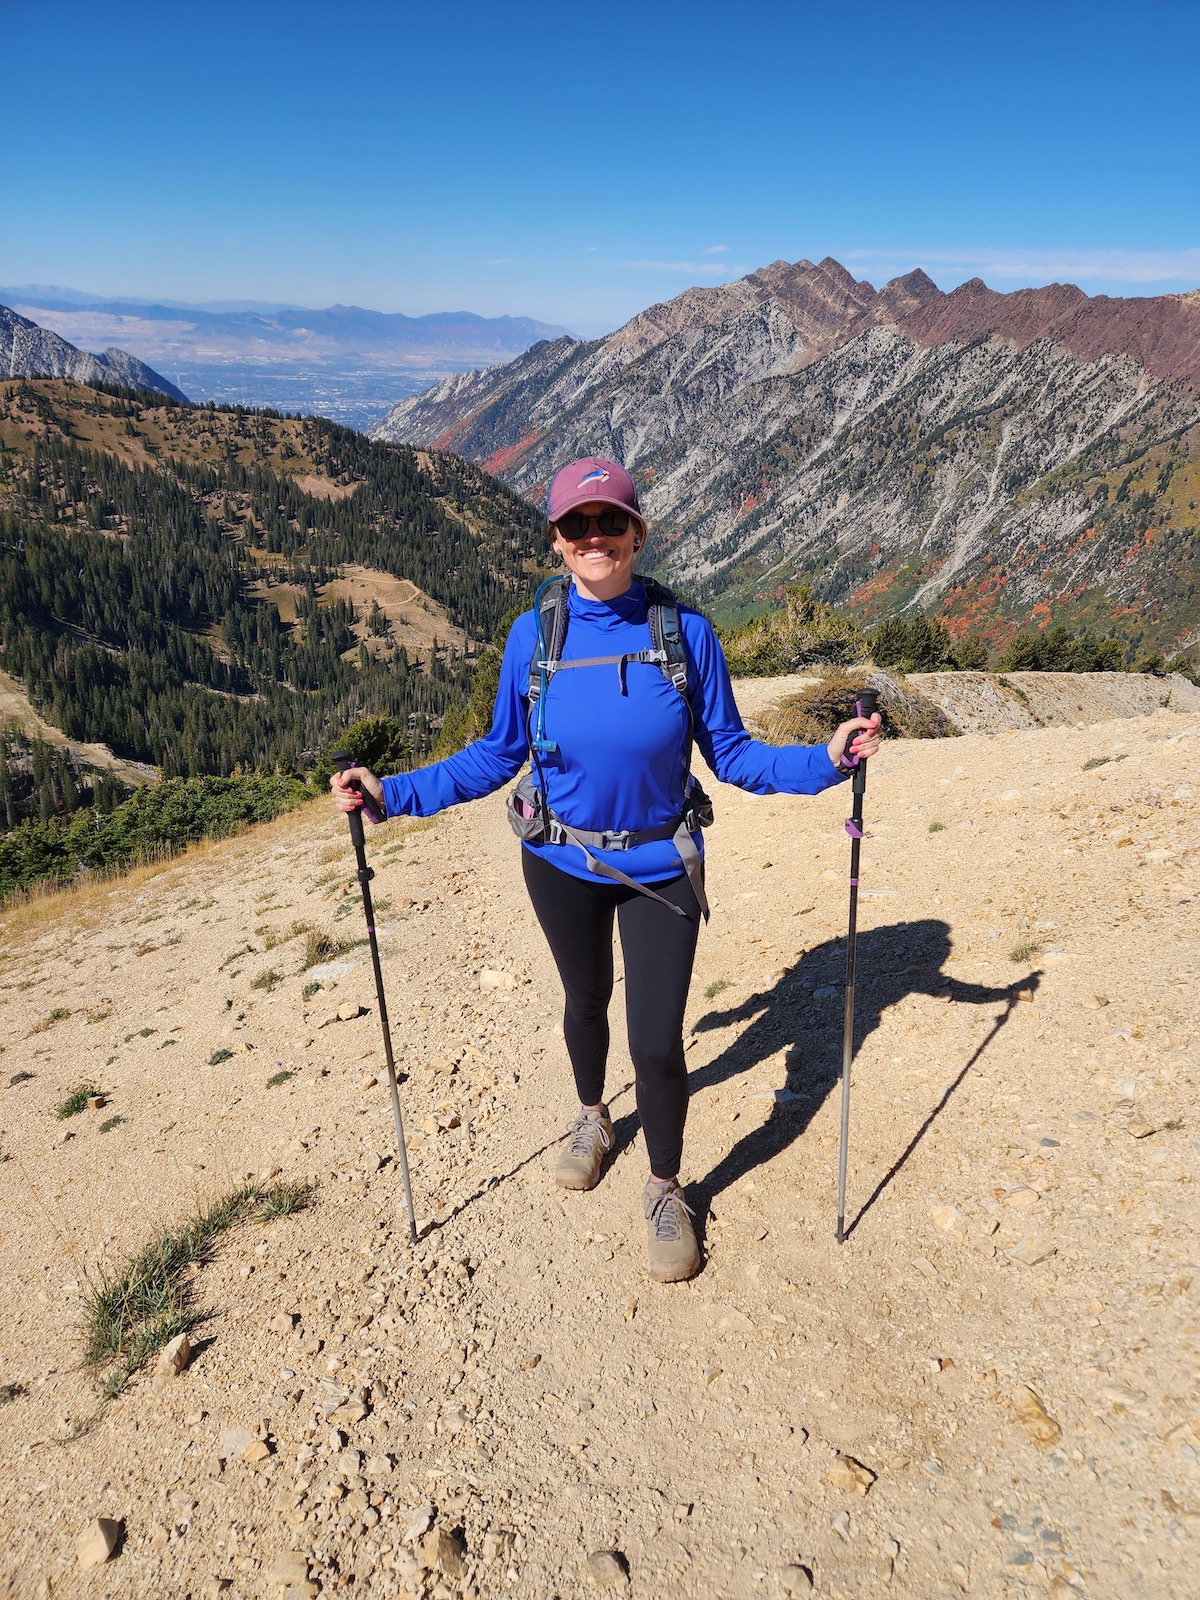 Kristen Bor hiking at the top of Snowbird Ski Area with mountains and Salt Lake Valley in the background. She is wearing the Outdoor Research Echo Hoody sun protection shirt